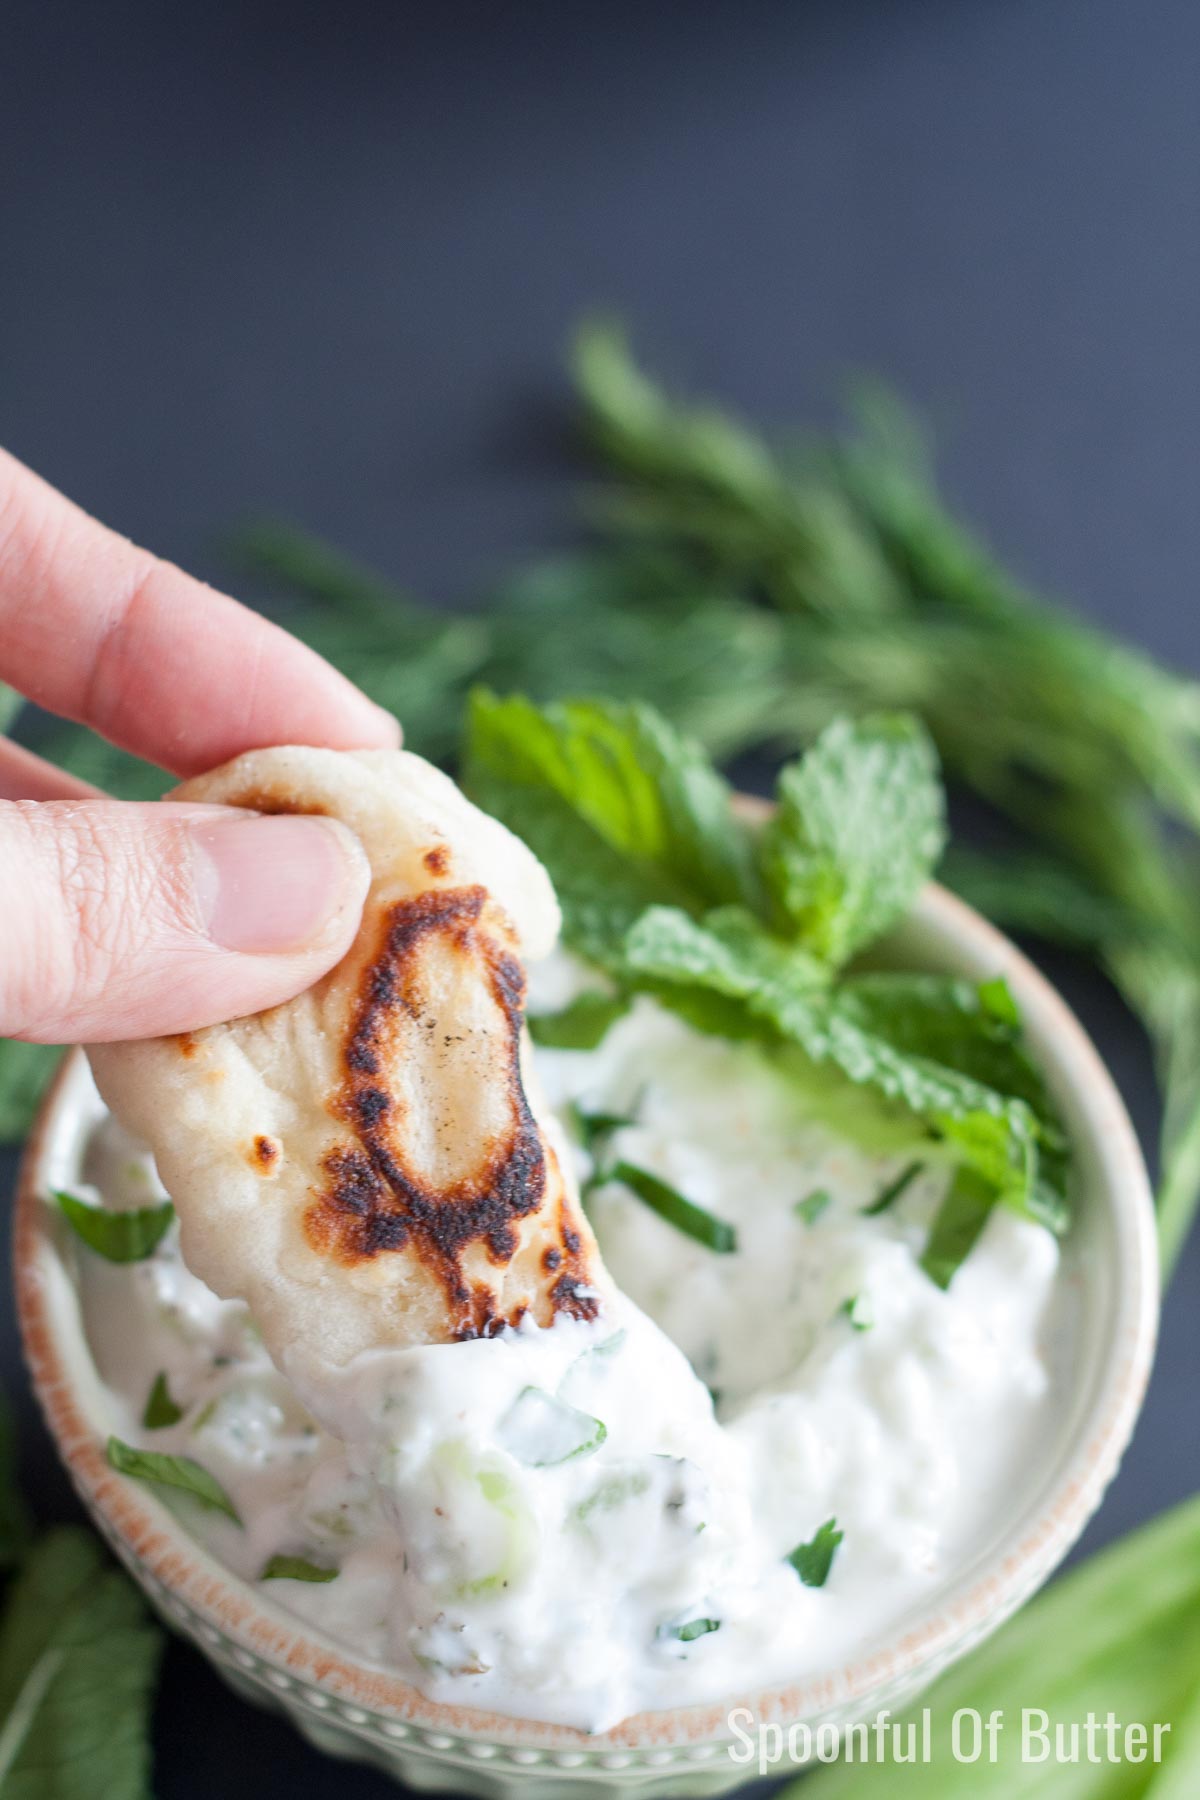 This is a good tzatziki recipe! Refreshing cucumber, creamy Greek yogurt, and zingy lemon make it the perfect condiment for just about everything.